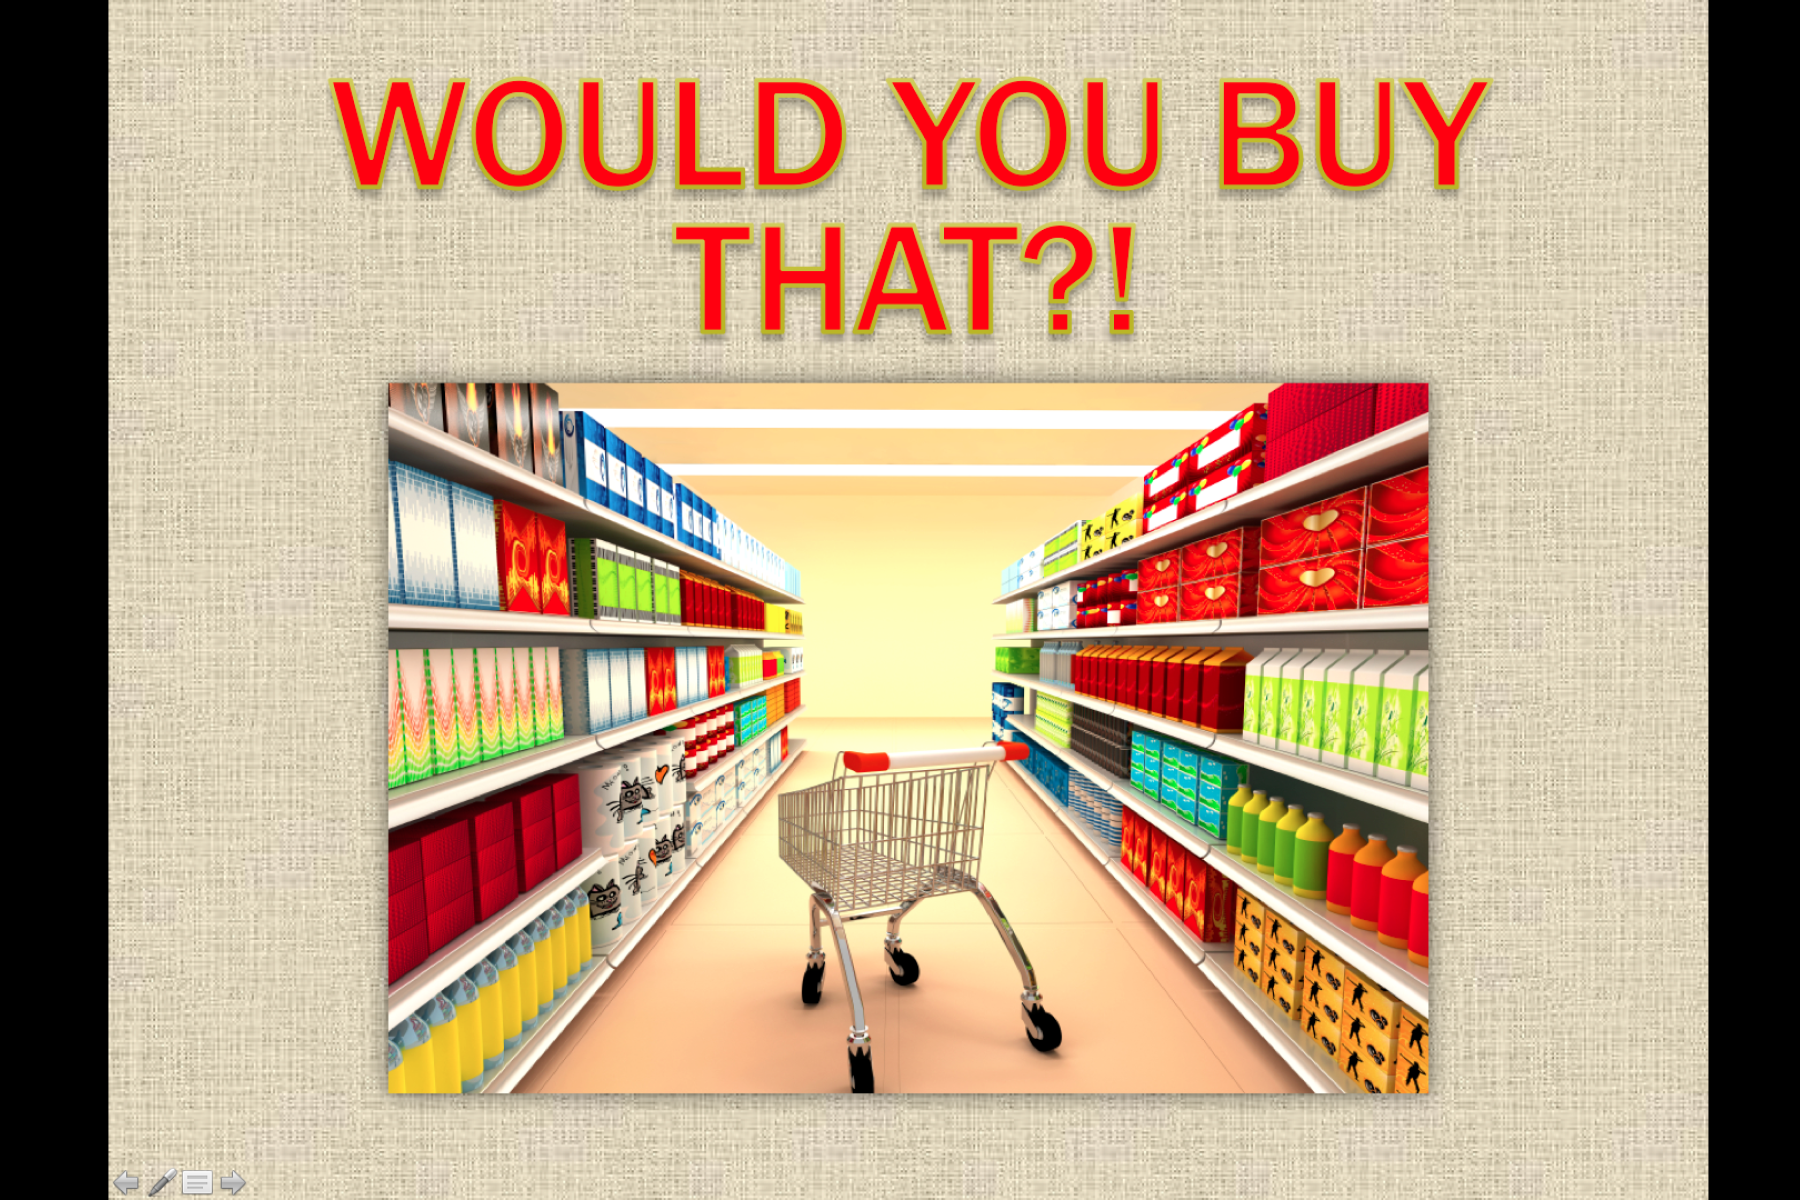 Image of  a slide featuring a grocery cart in an aisle 